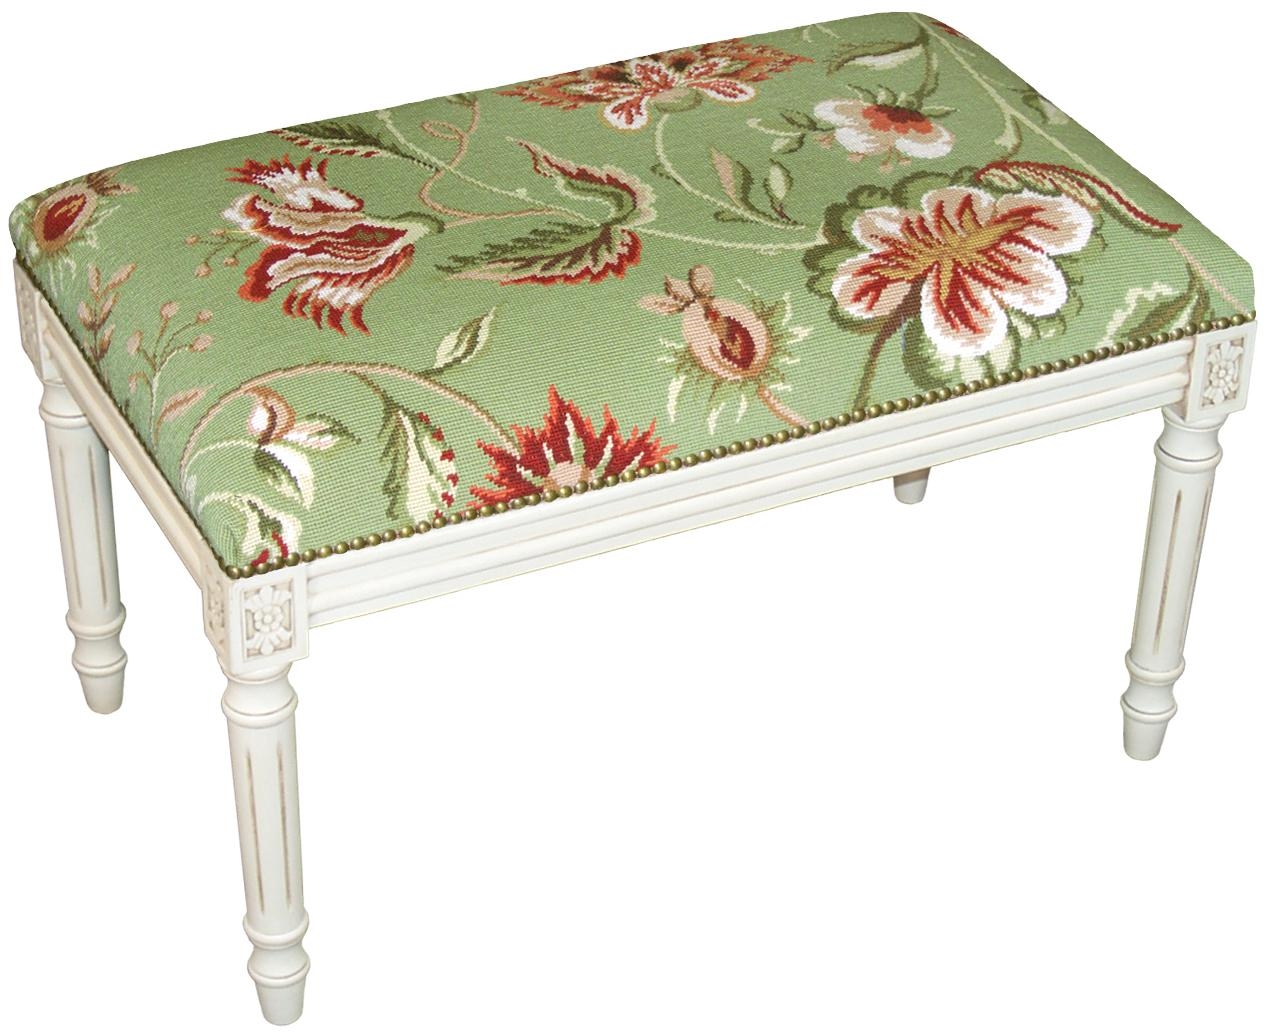 Bench Jacobean Floral Flowers Green Antique White Wash Antiqued Needlepoint-Image 1